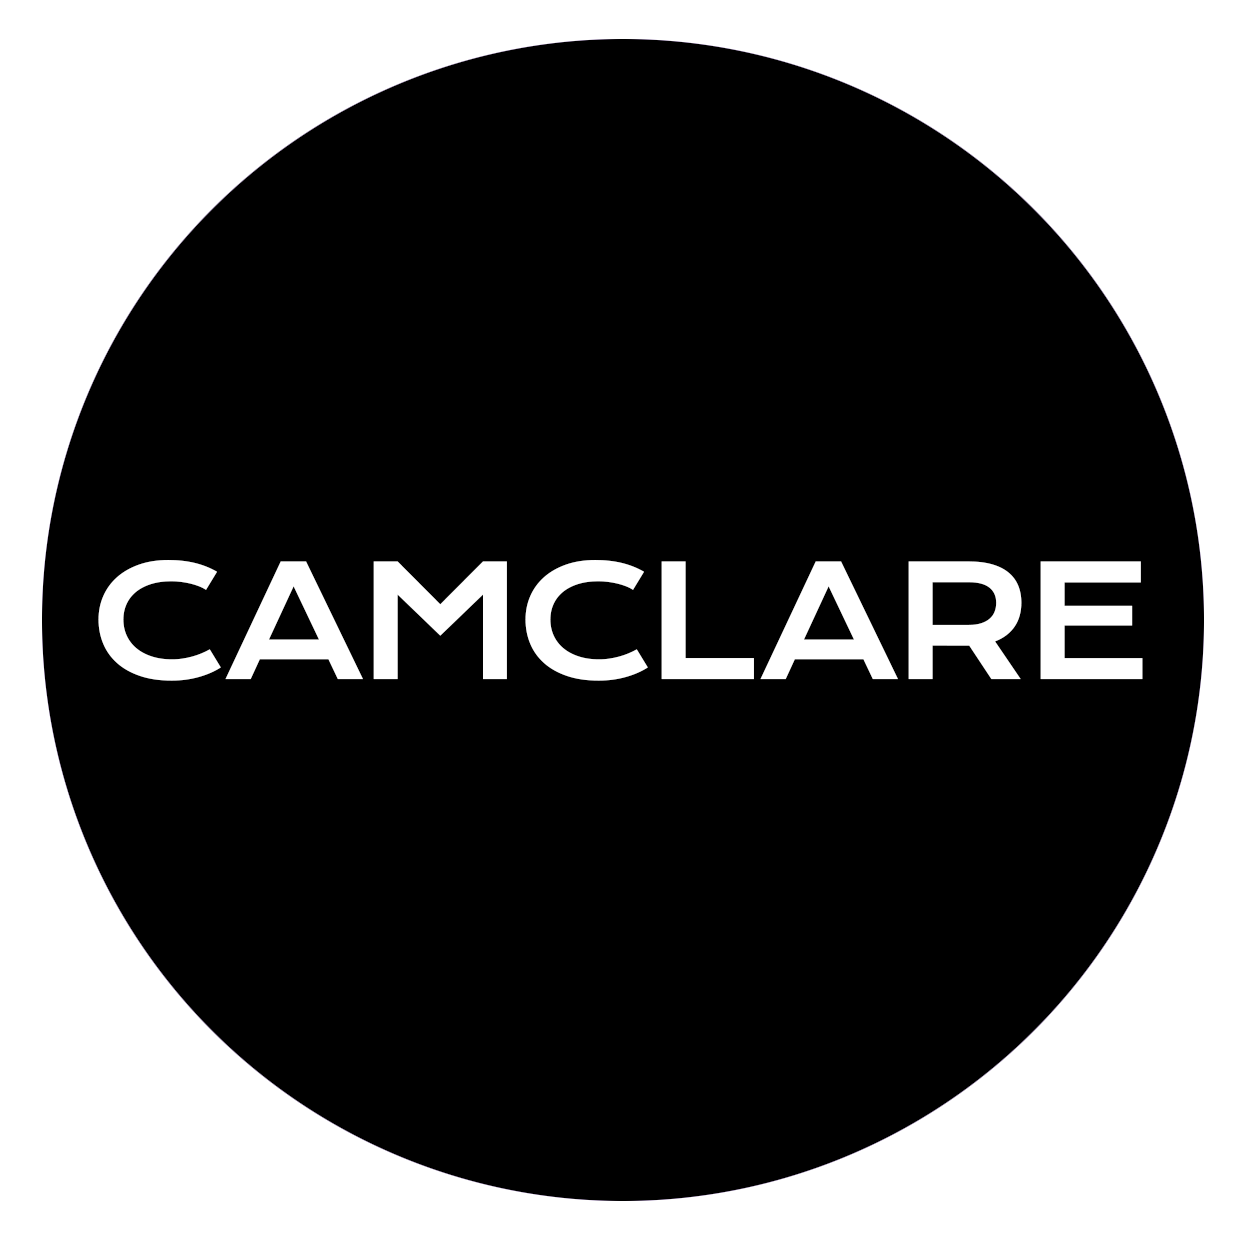 CAMCLARE circular, white text on black background, Cameron Clare